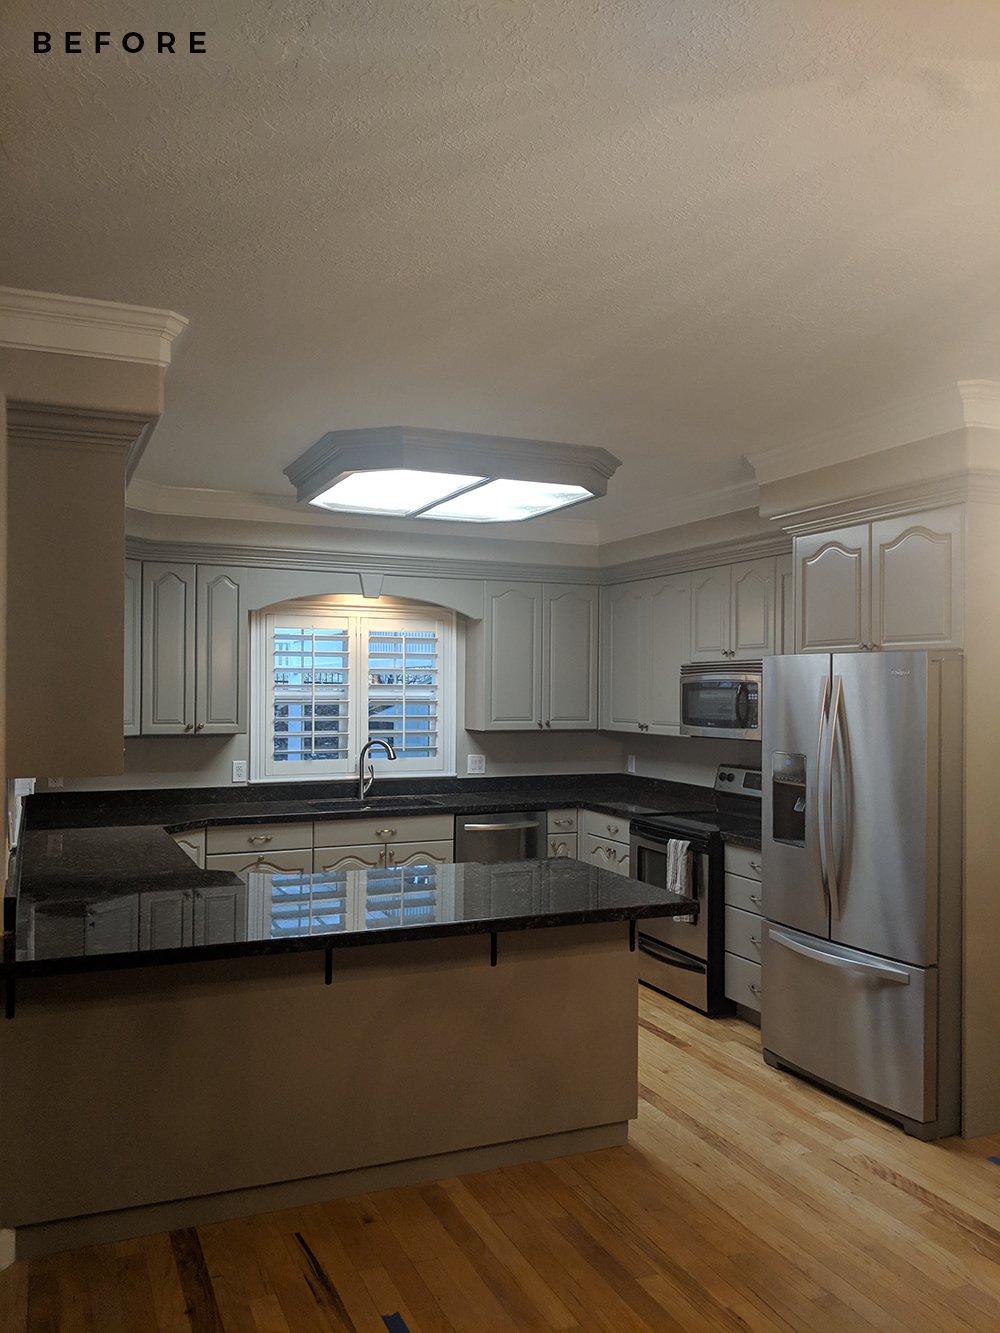 Our Next Big Project : The Kitchen - roomfortuesday.com